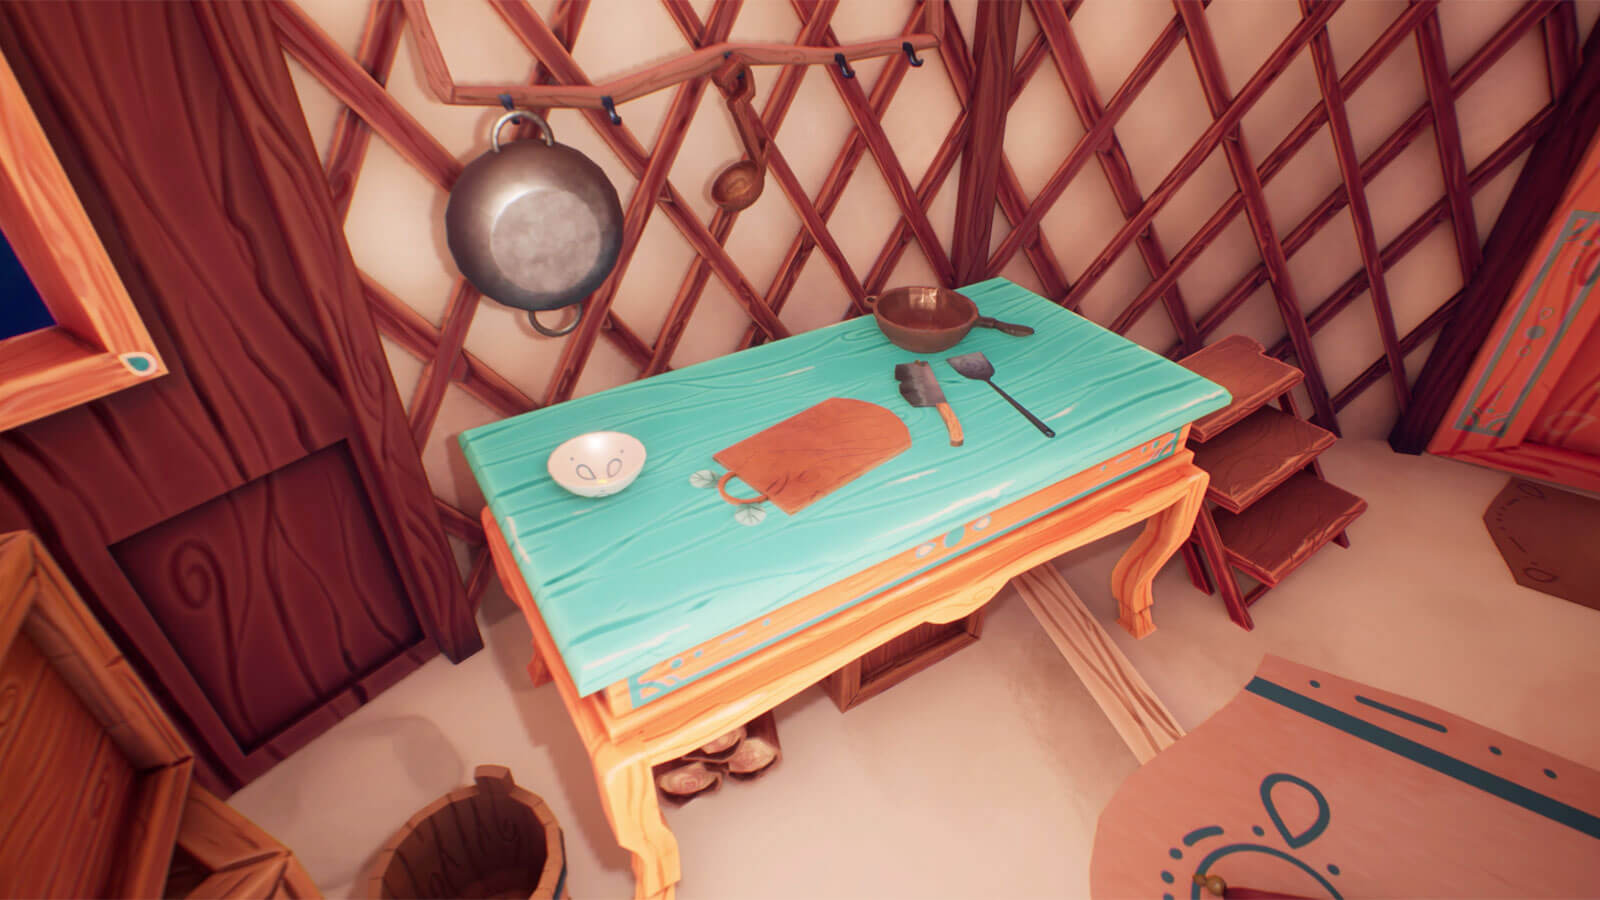 A small wooden desk with a teal top with a cutting board and small cooking untensils on it.